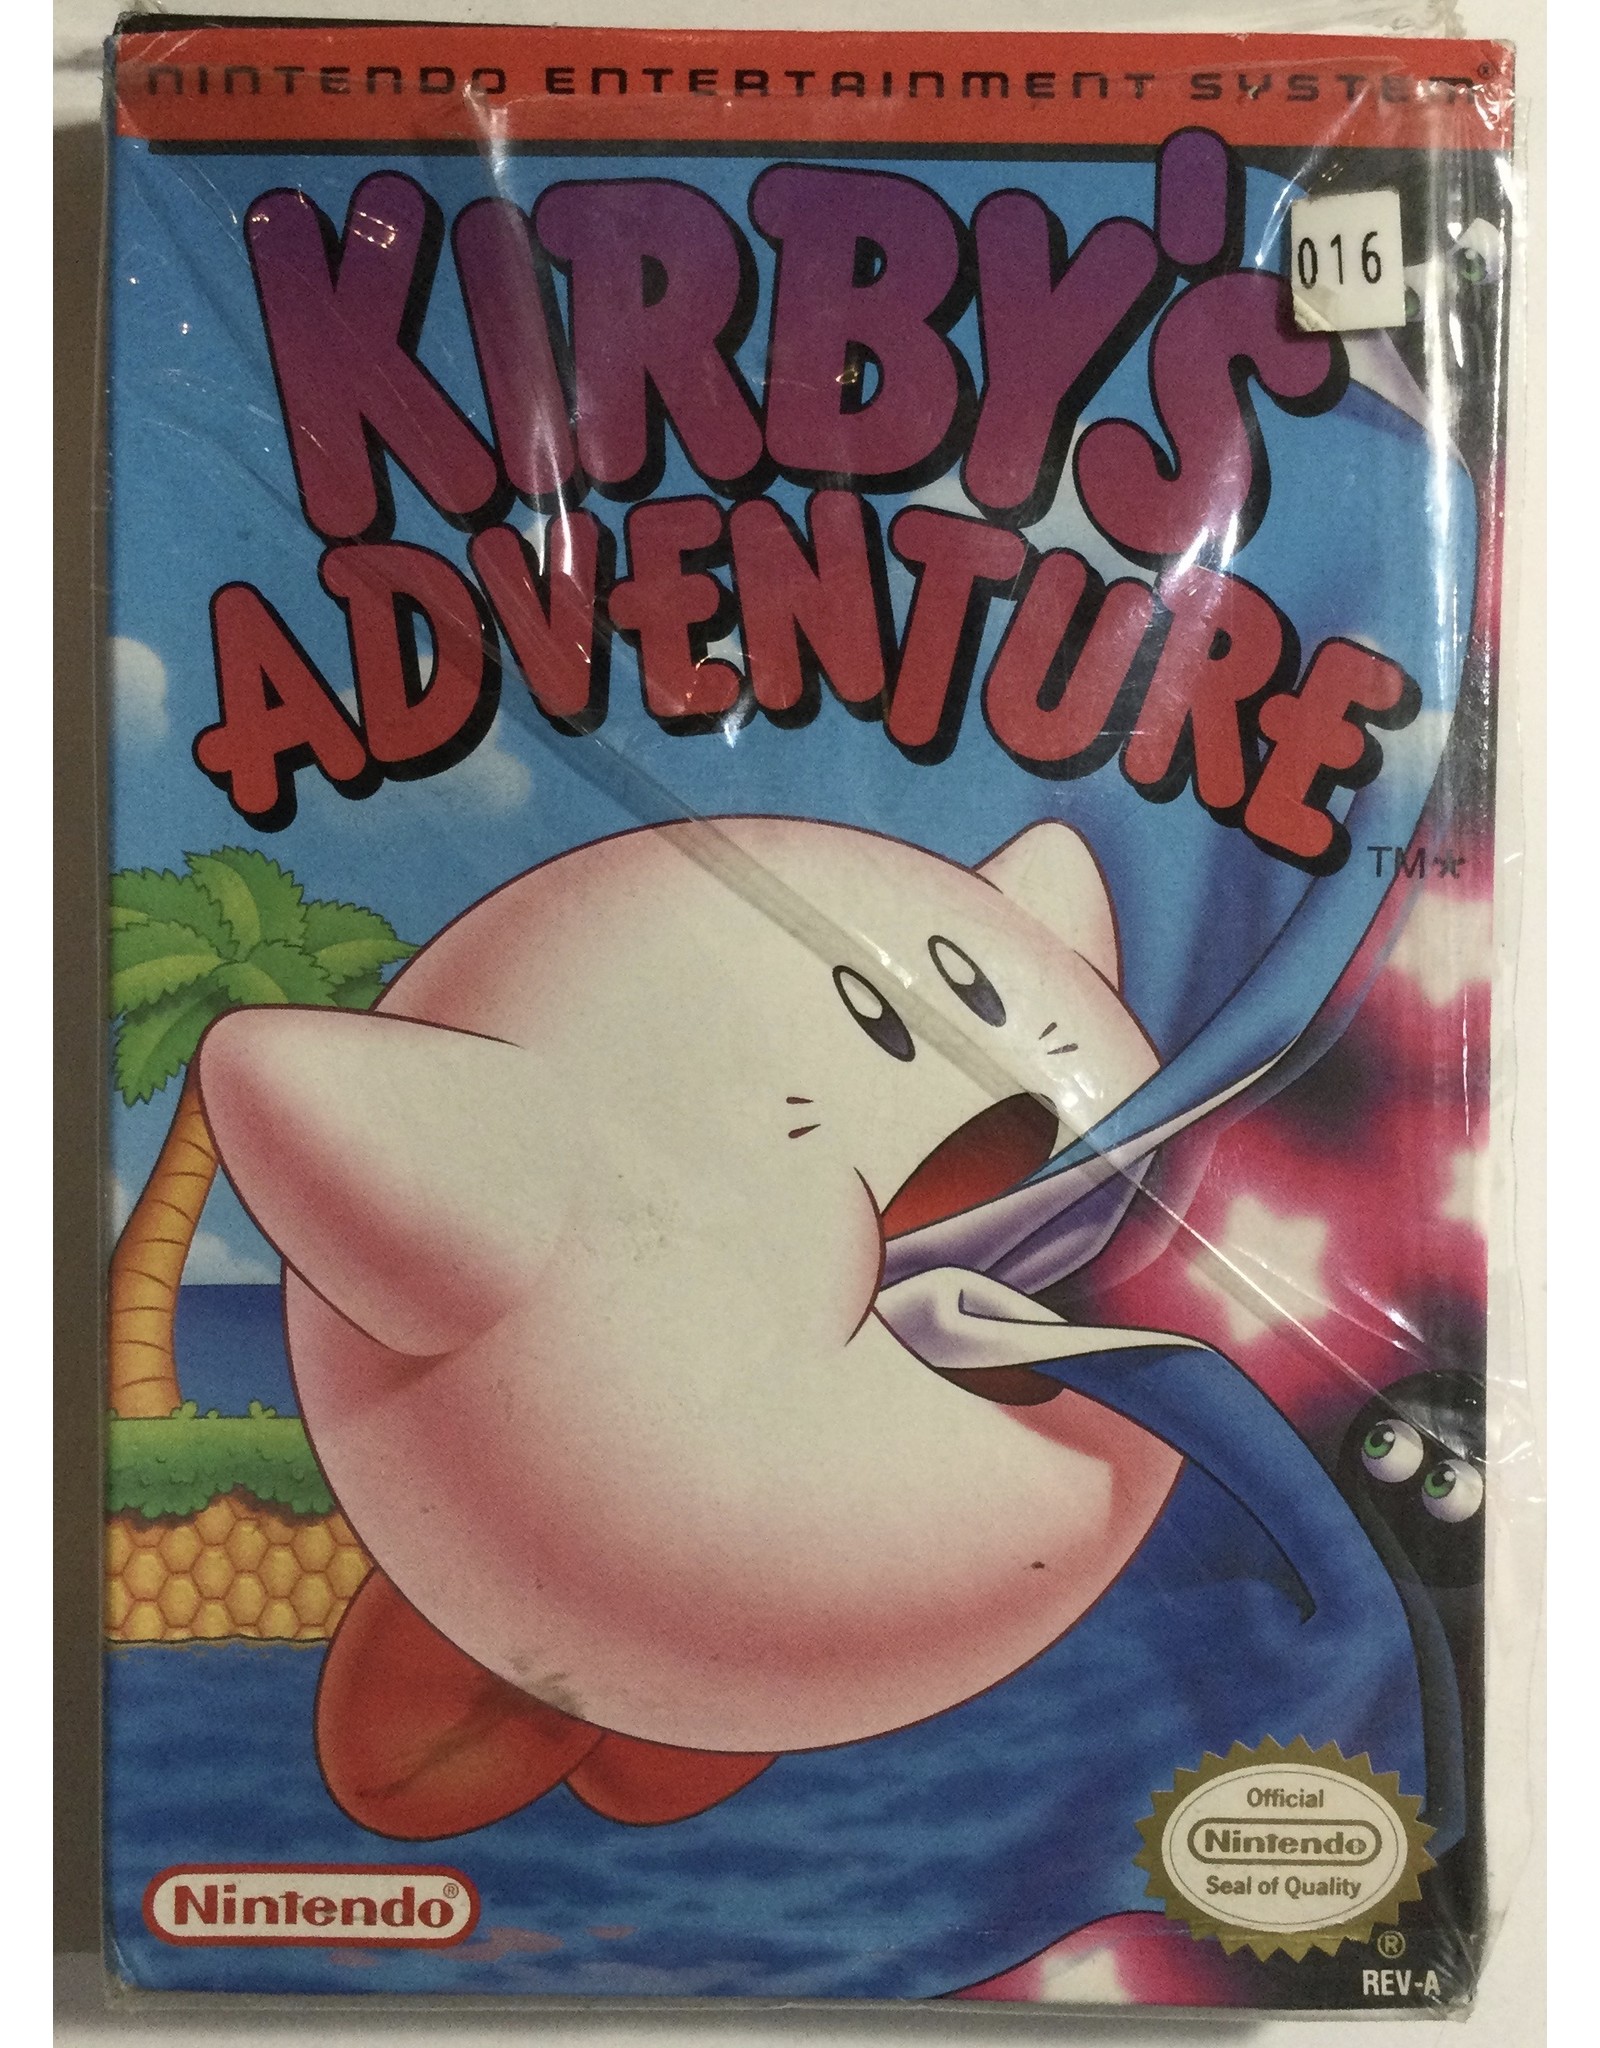 Kirby's Adventure for Nintendo Entertainment system (NES) 